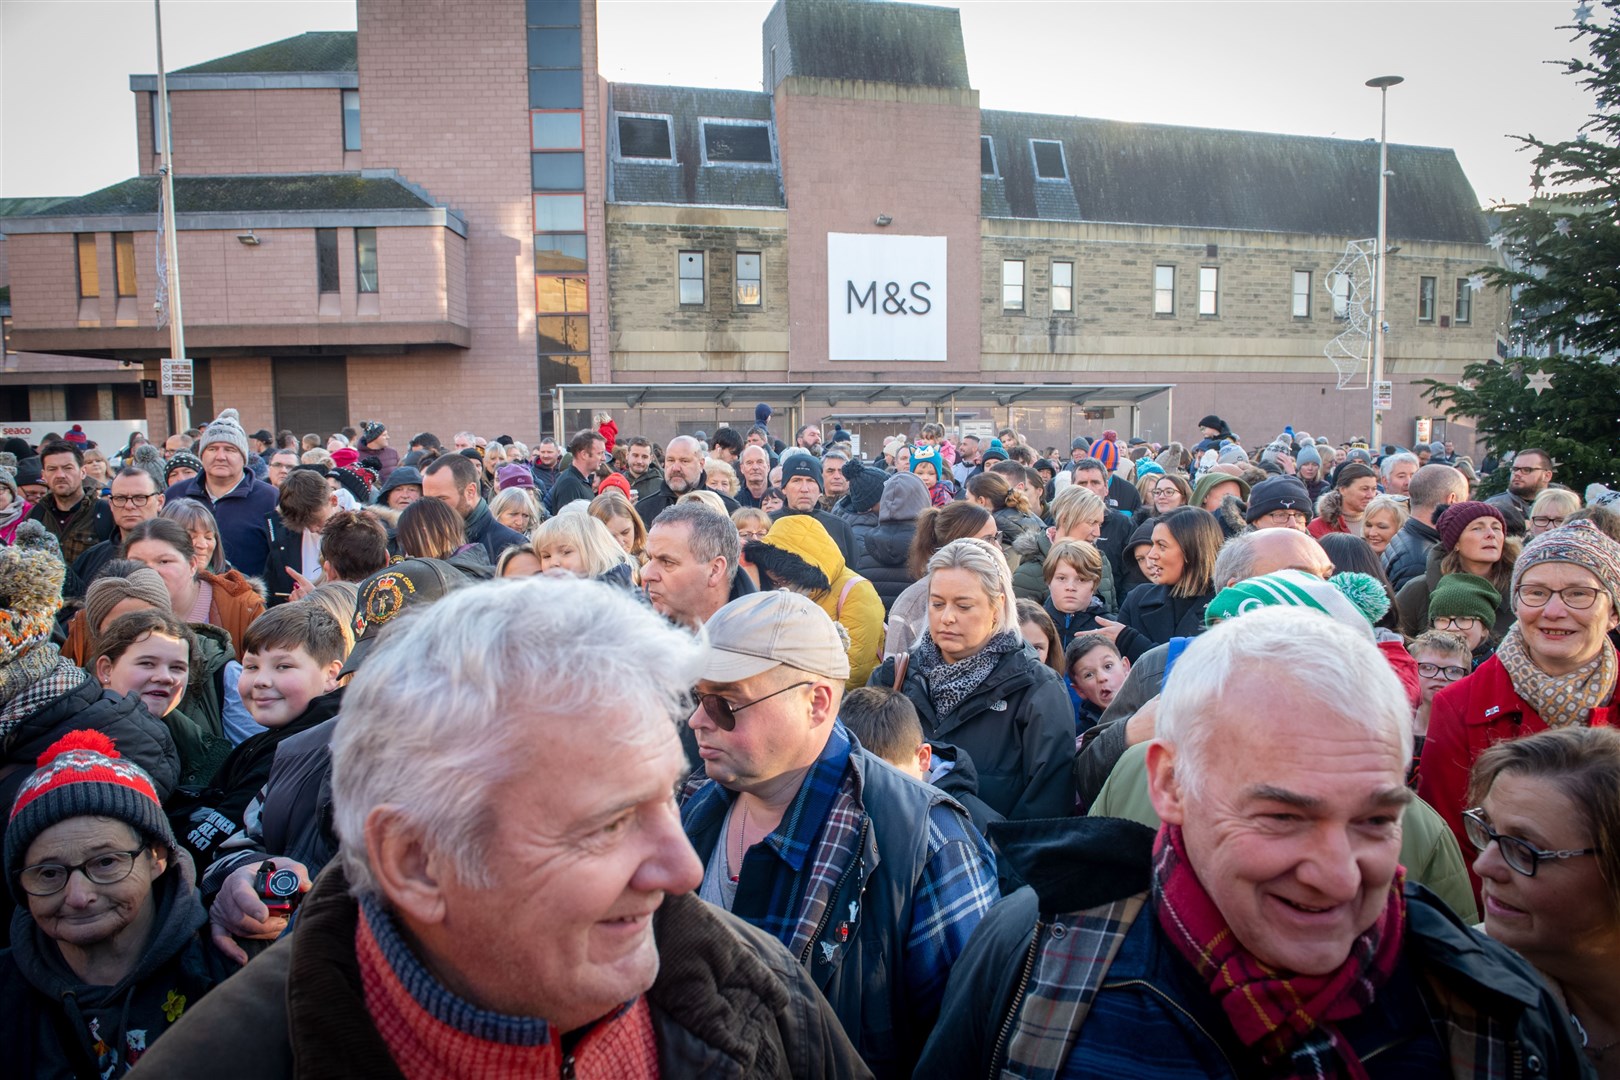 The free gig attracted over 1,000 to Falcon Square. Picture: Callum Mackay